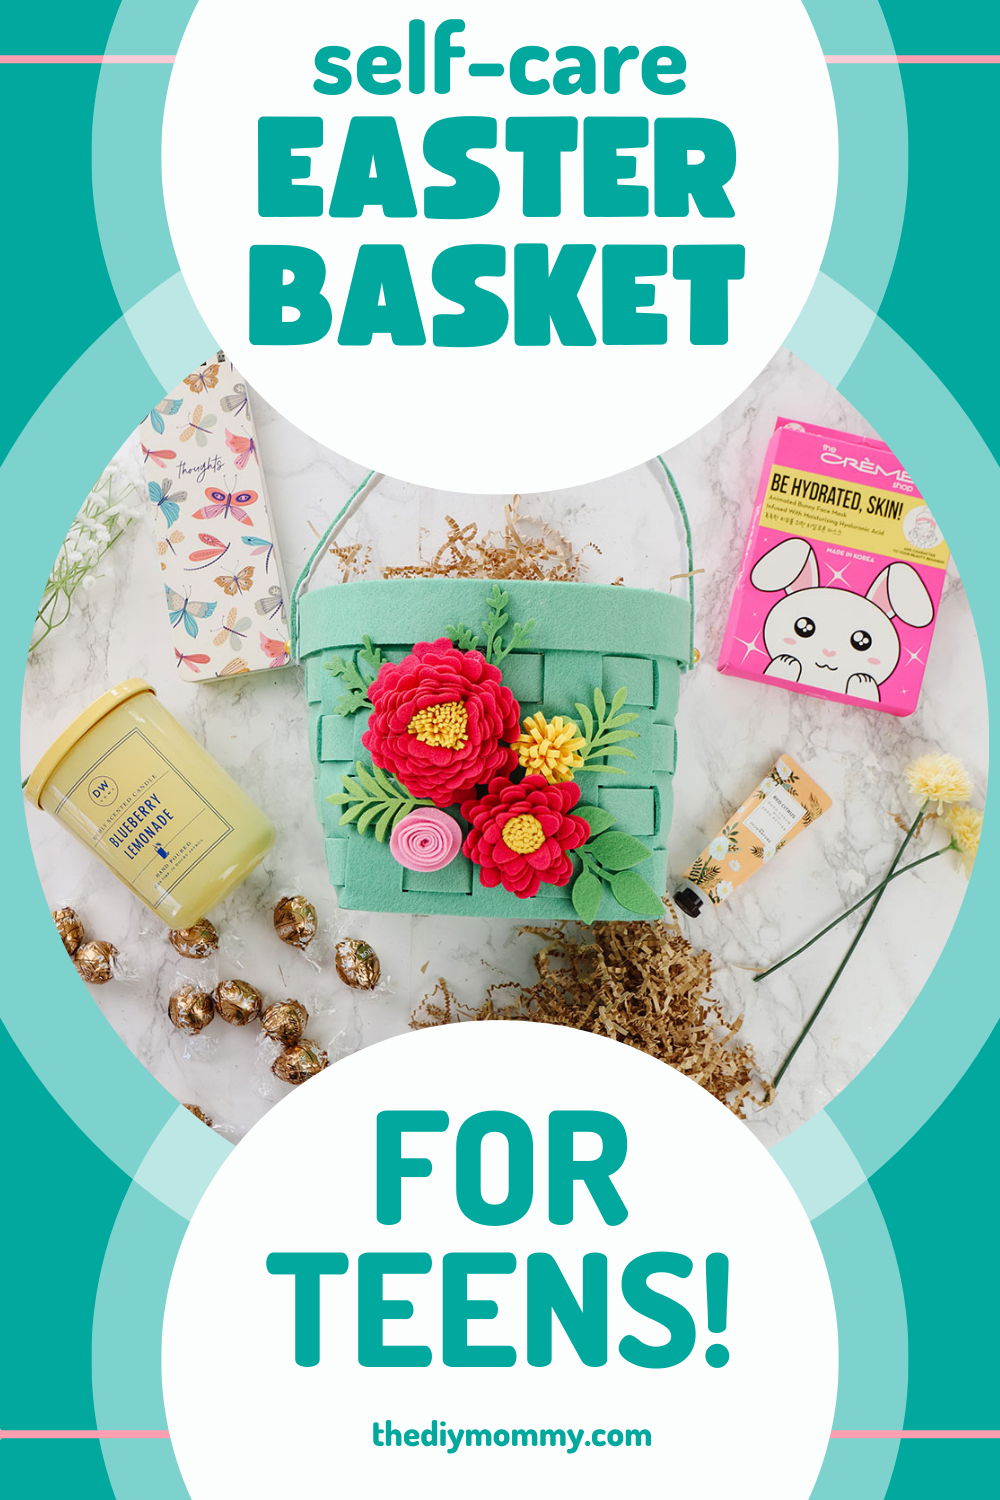 Easter Basket for Teens - Self Care Idea with suggested items to add